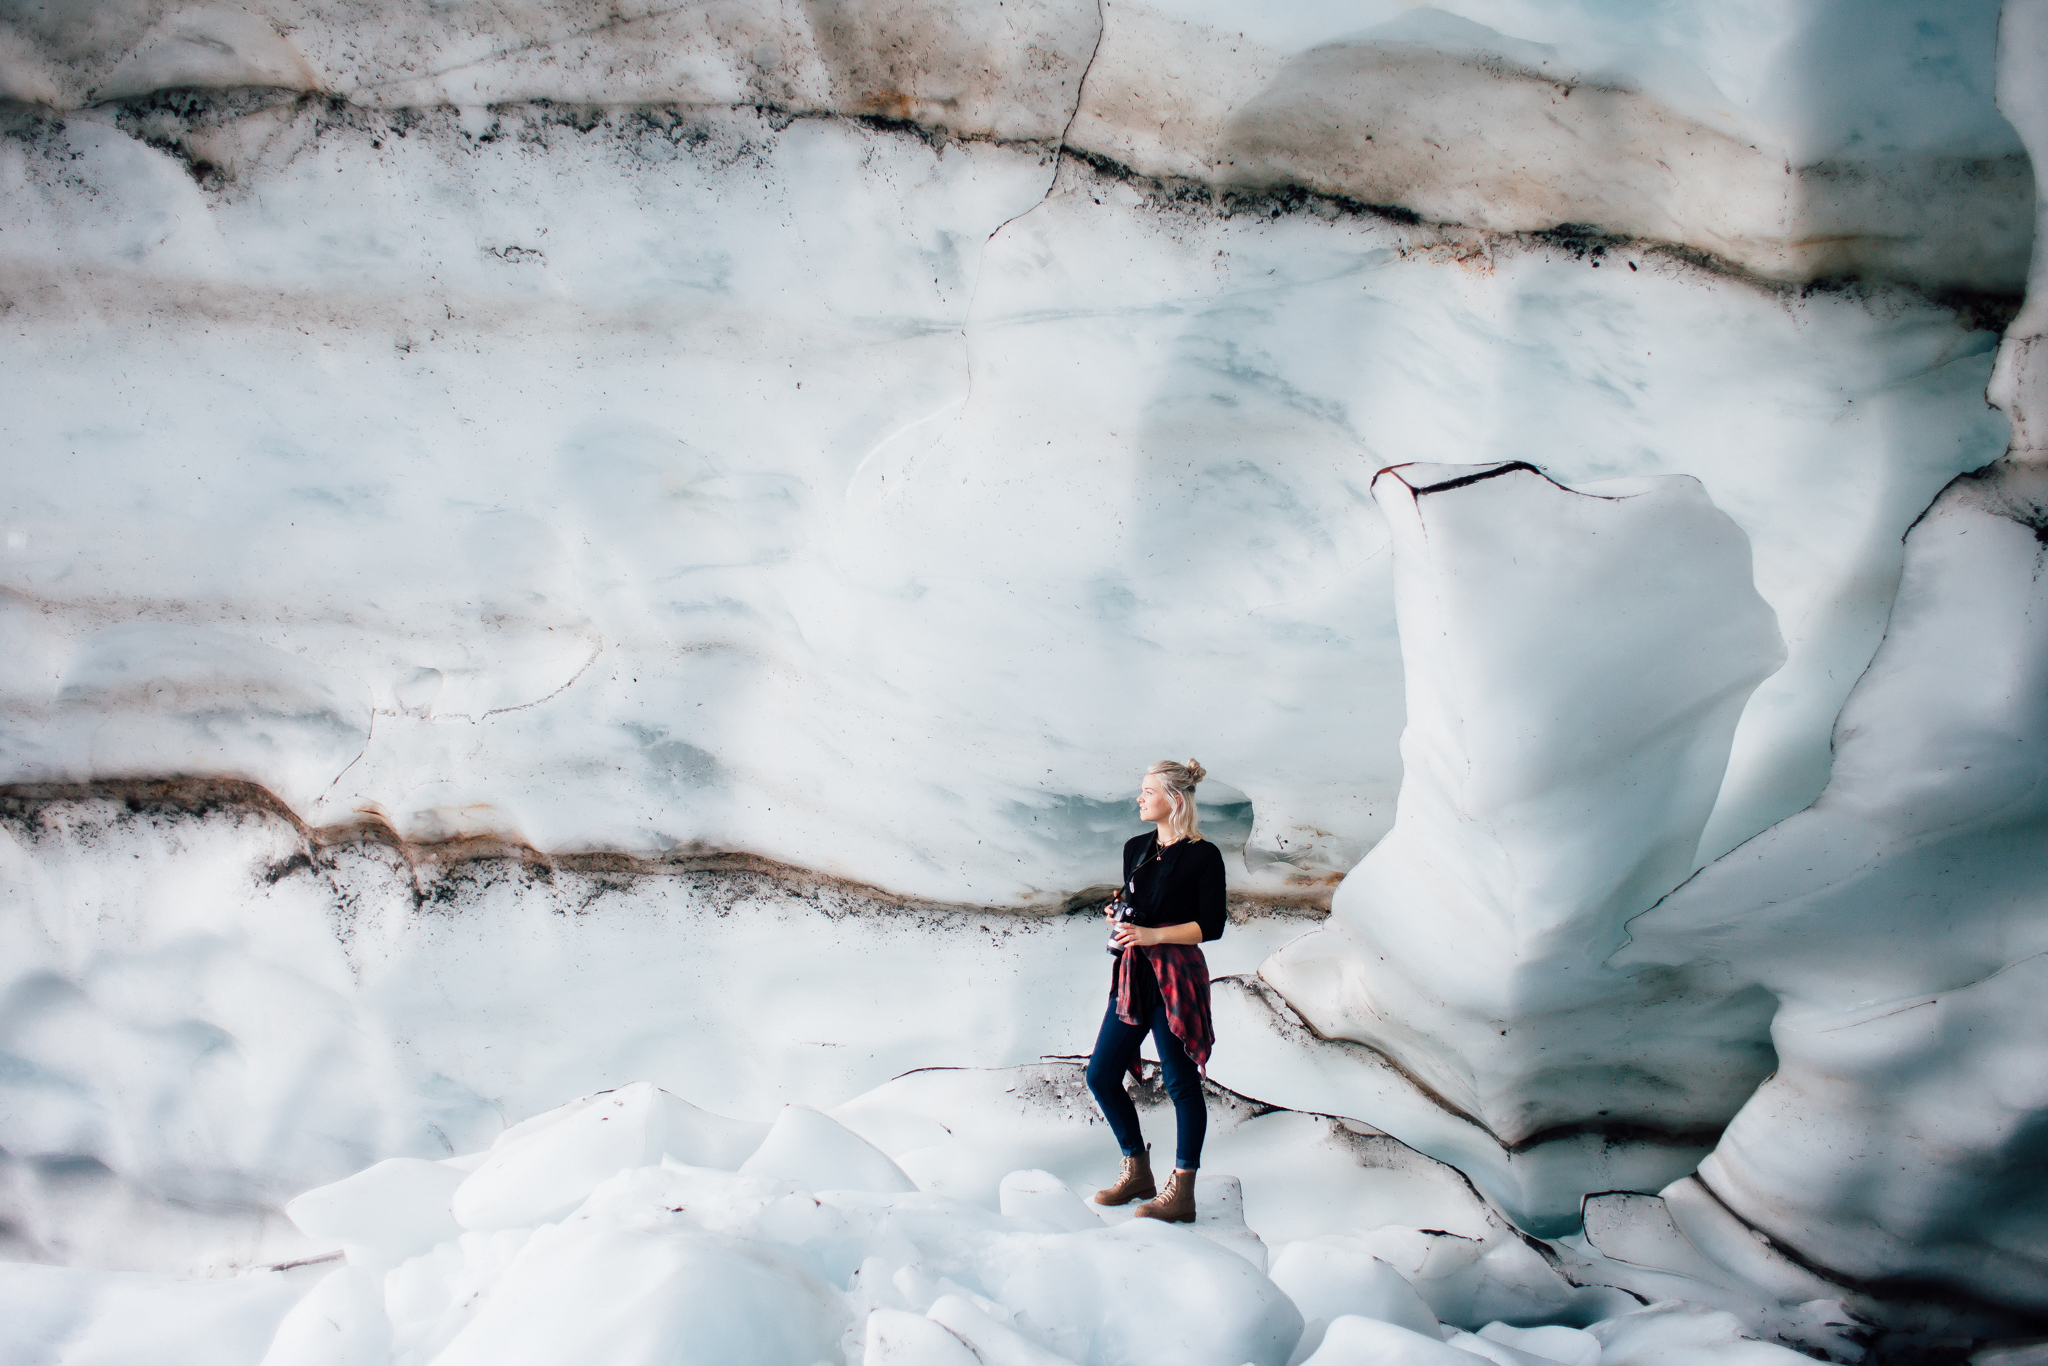 View More: http://michellekarstphotography.pass.us/icecaves